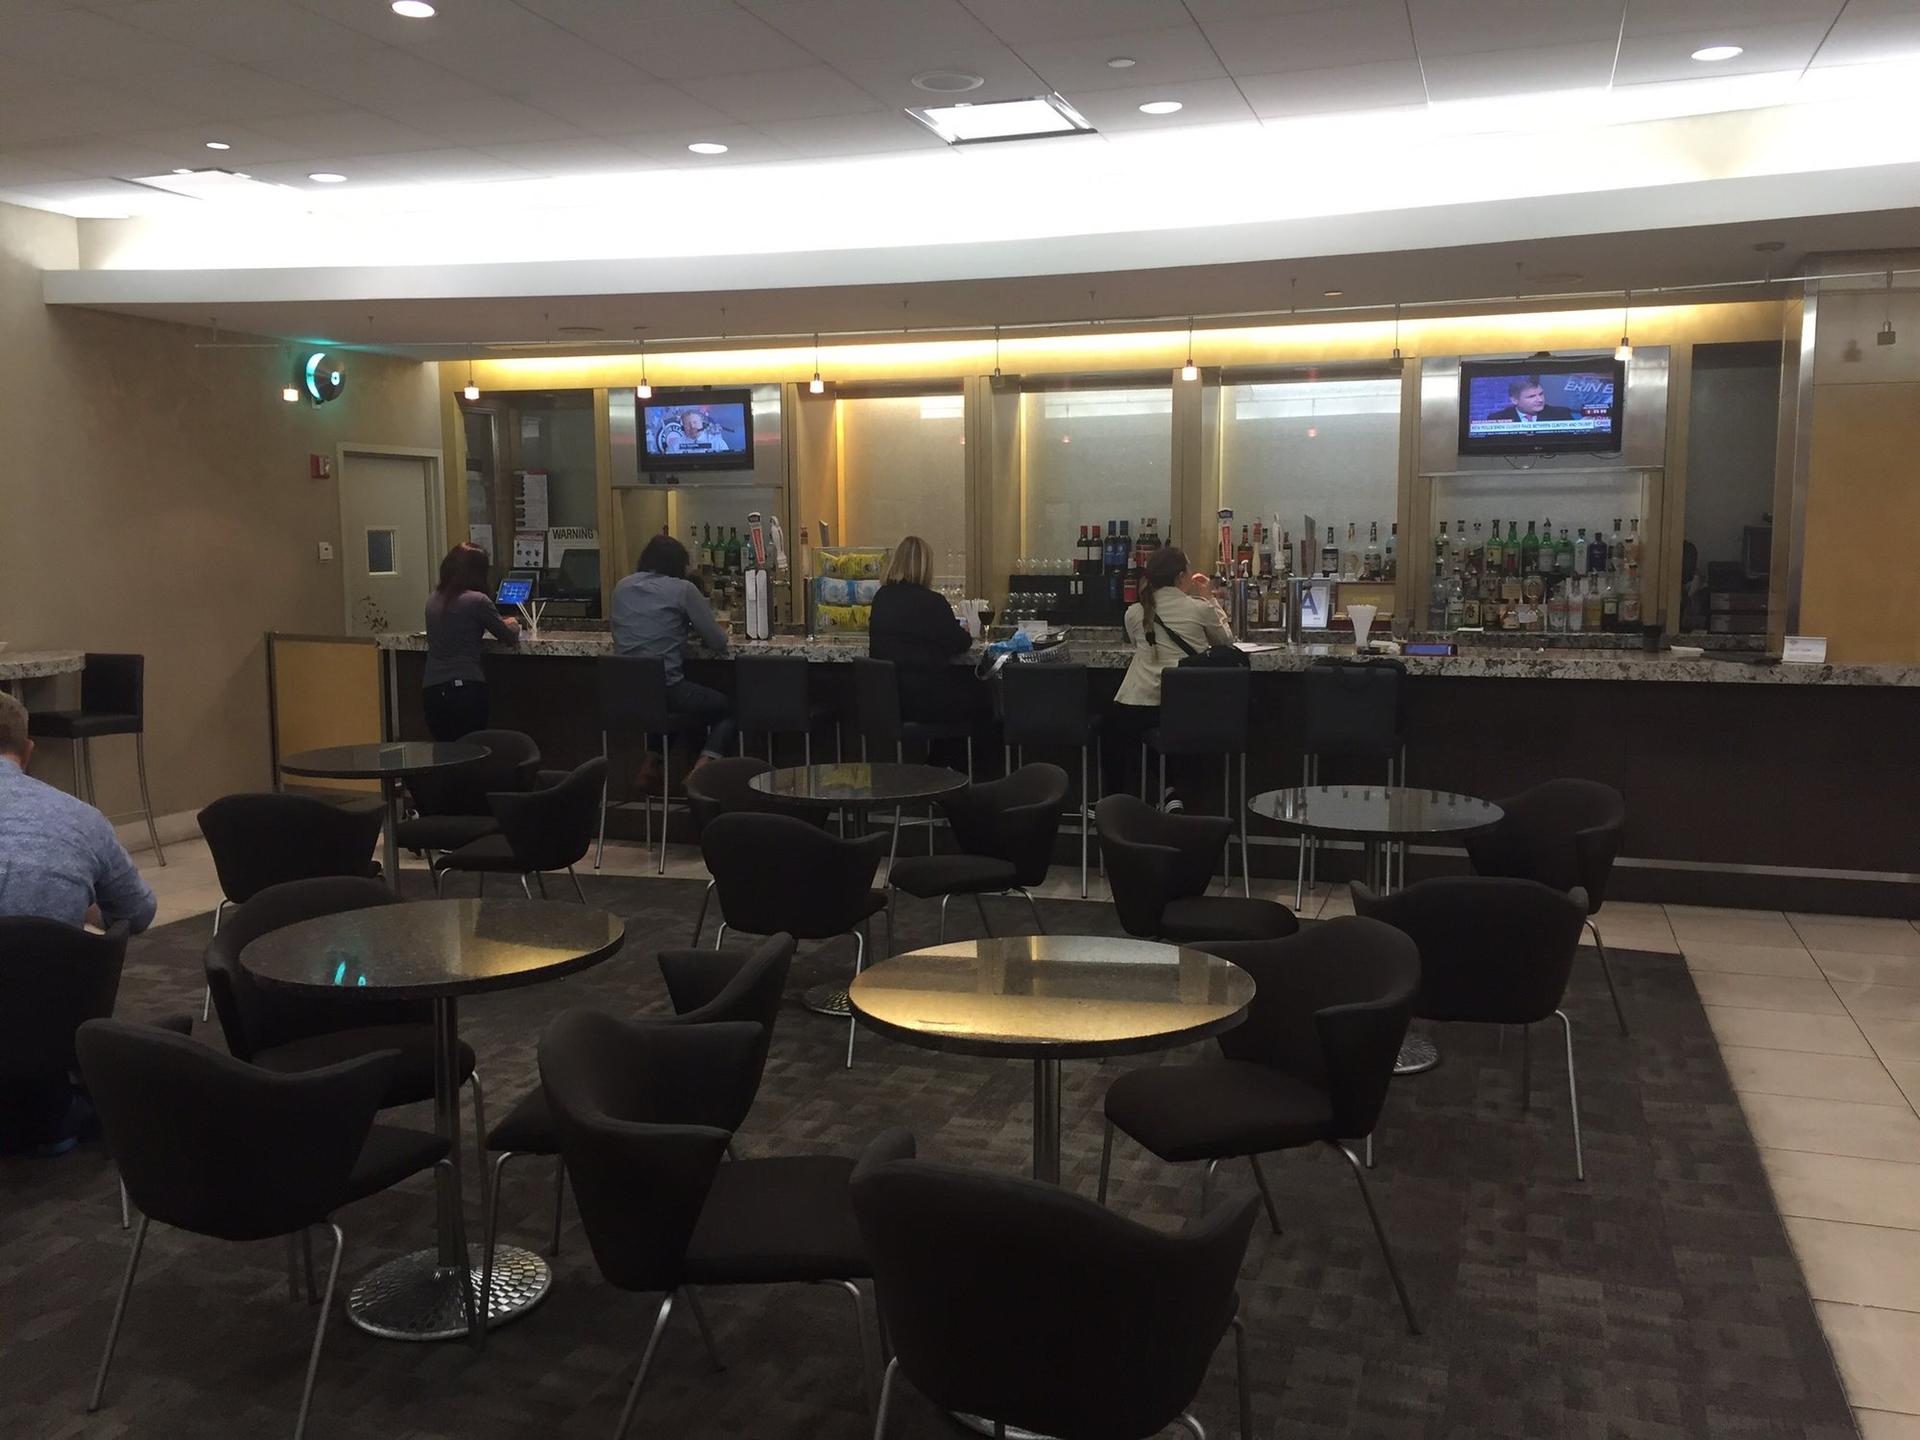 American Airlines Admirals Club image 16 of 25